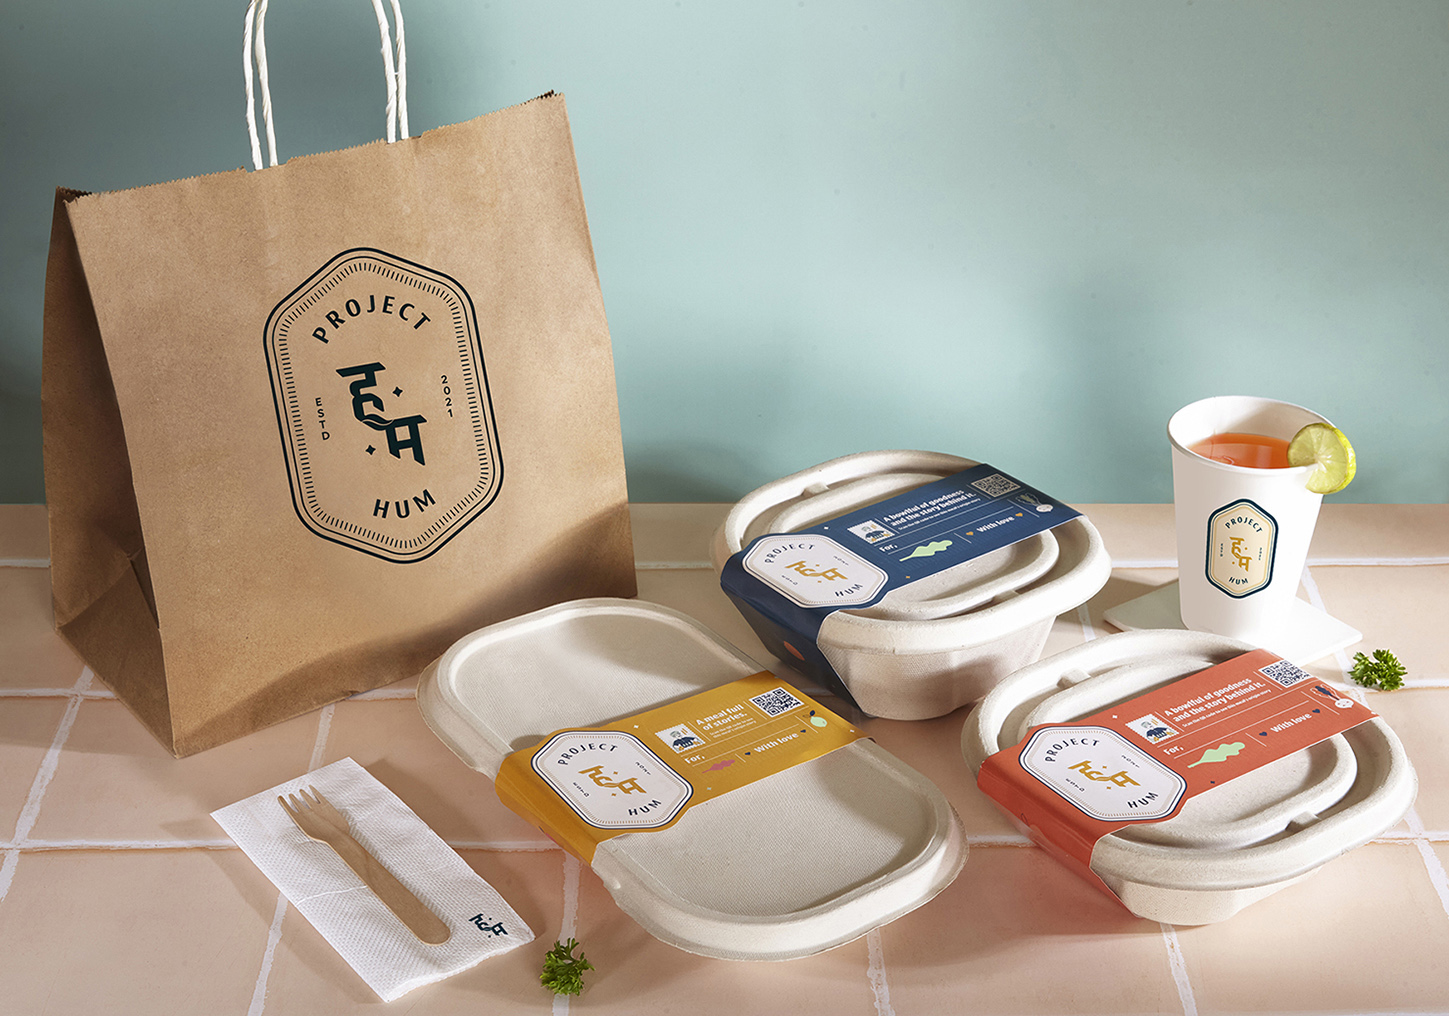 Project Hum’s Brand Design Celebrating Local Farmers and Sustainable Food